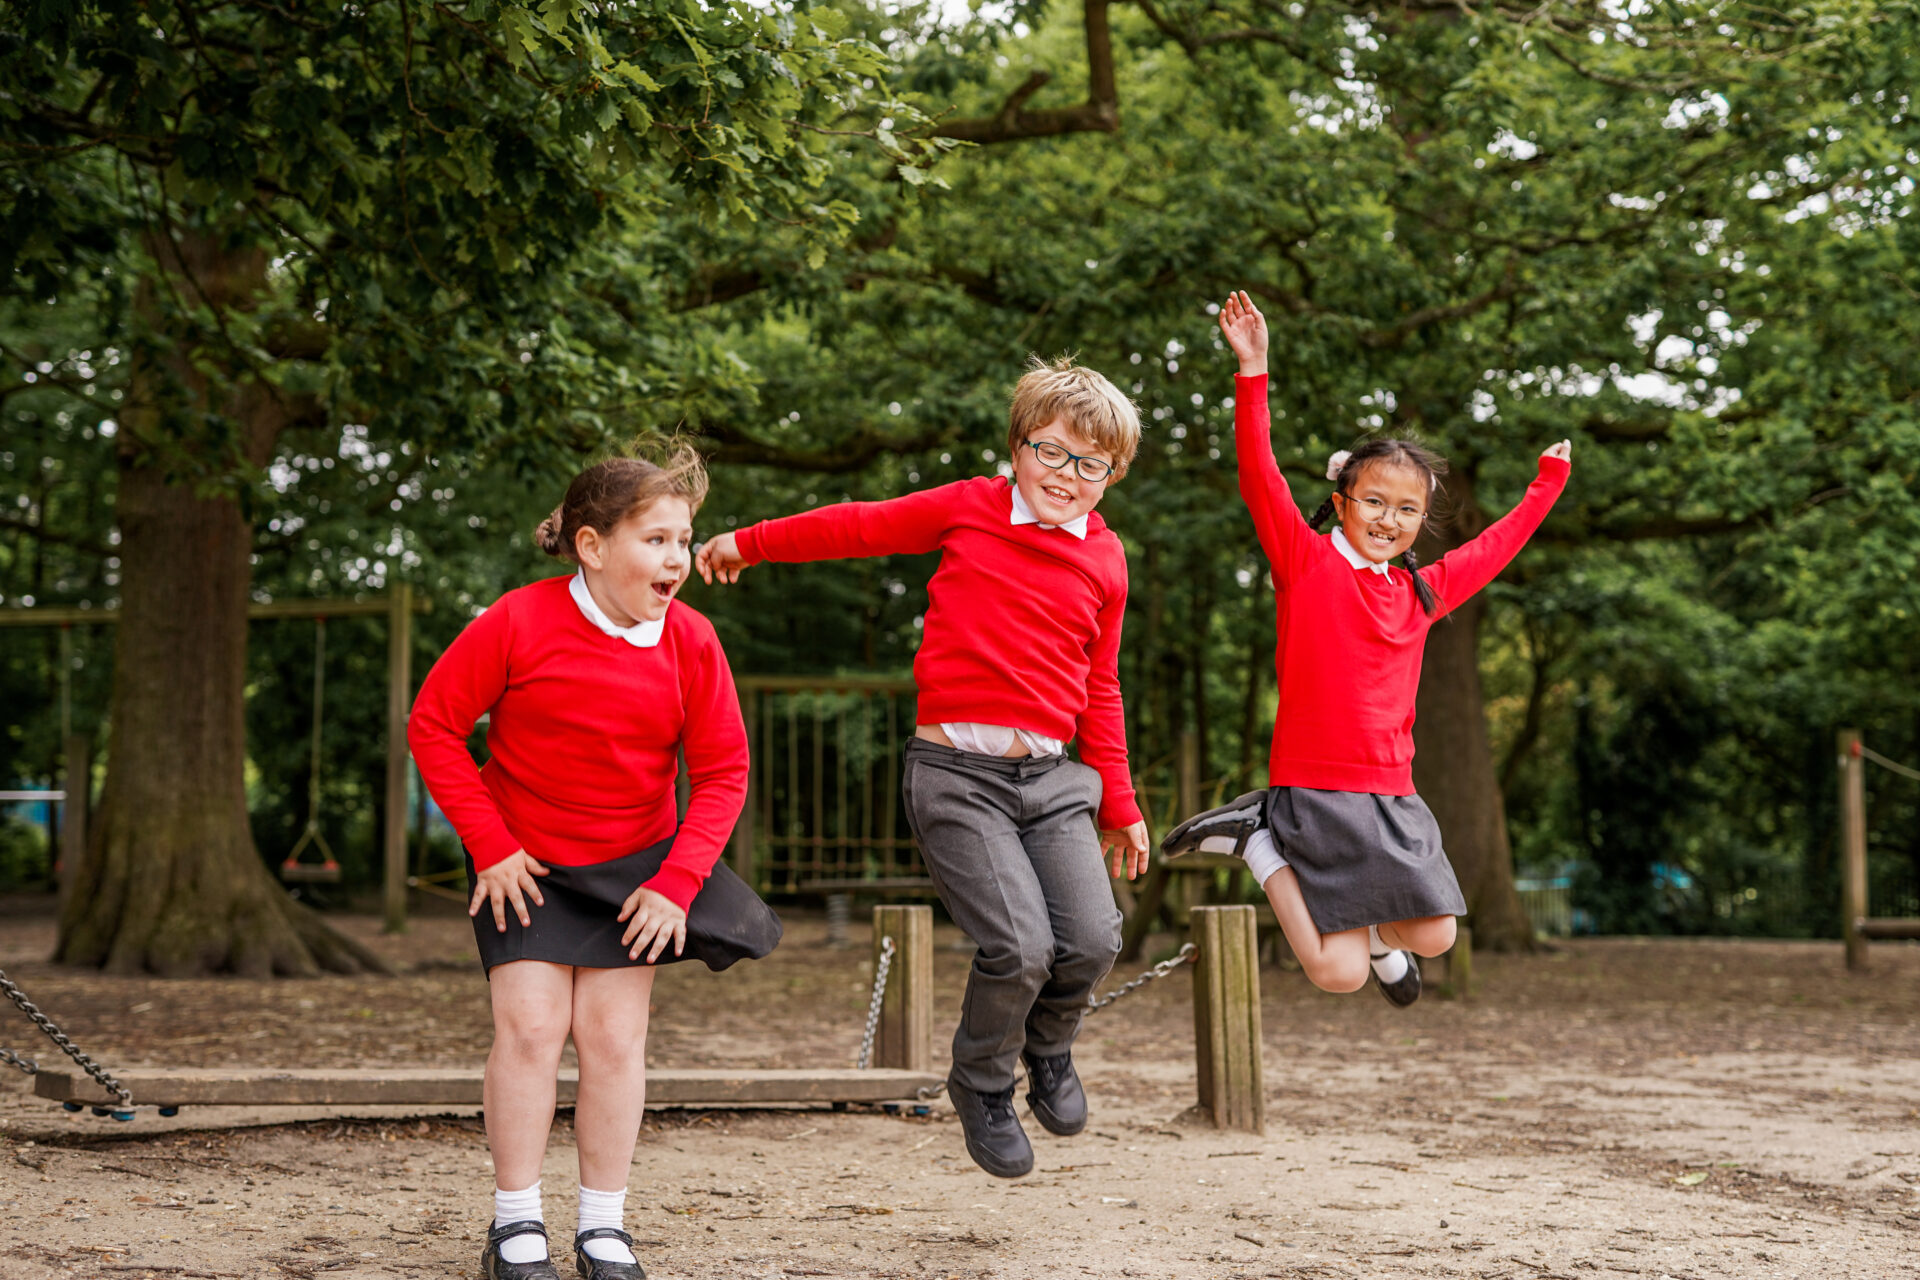 Children in red and black school uniforms jump in the air